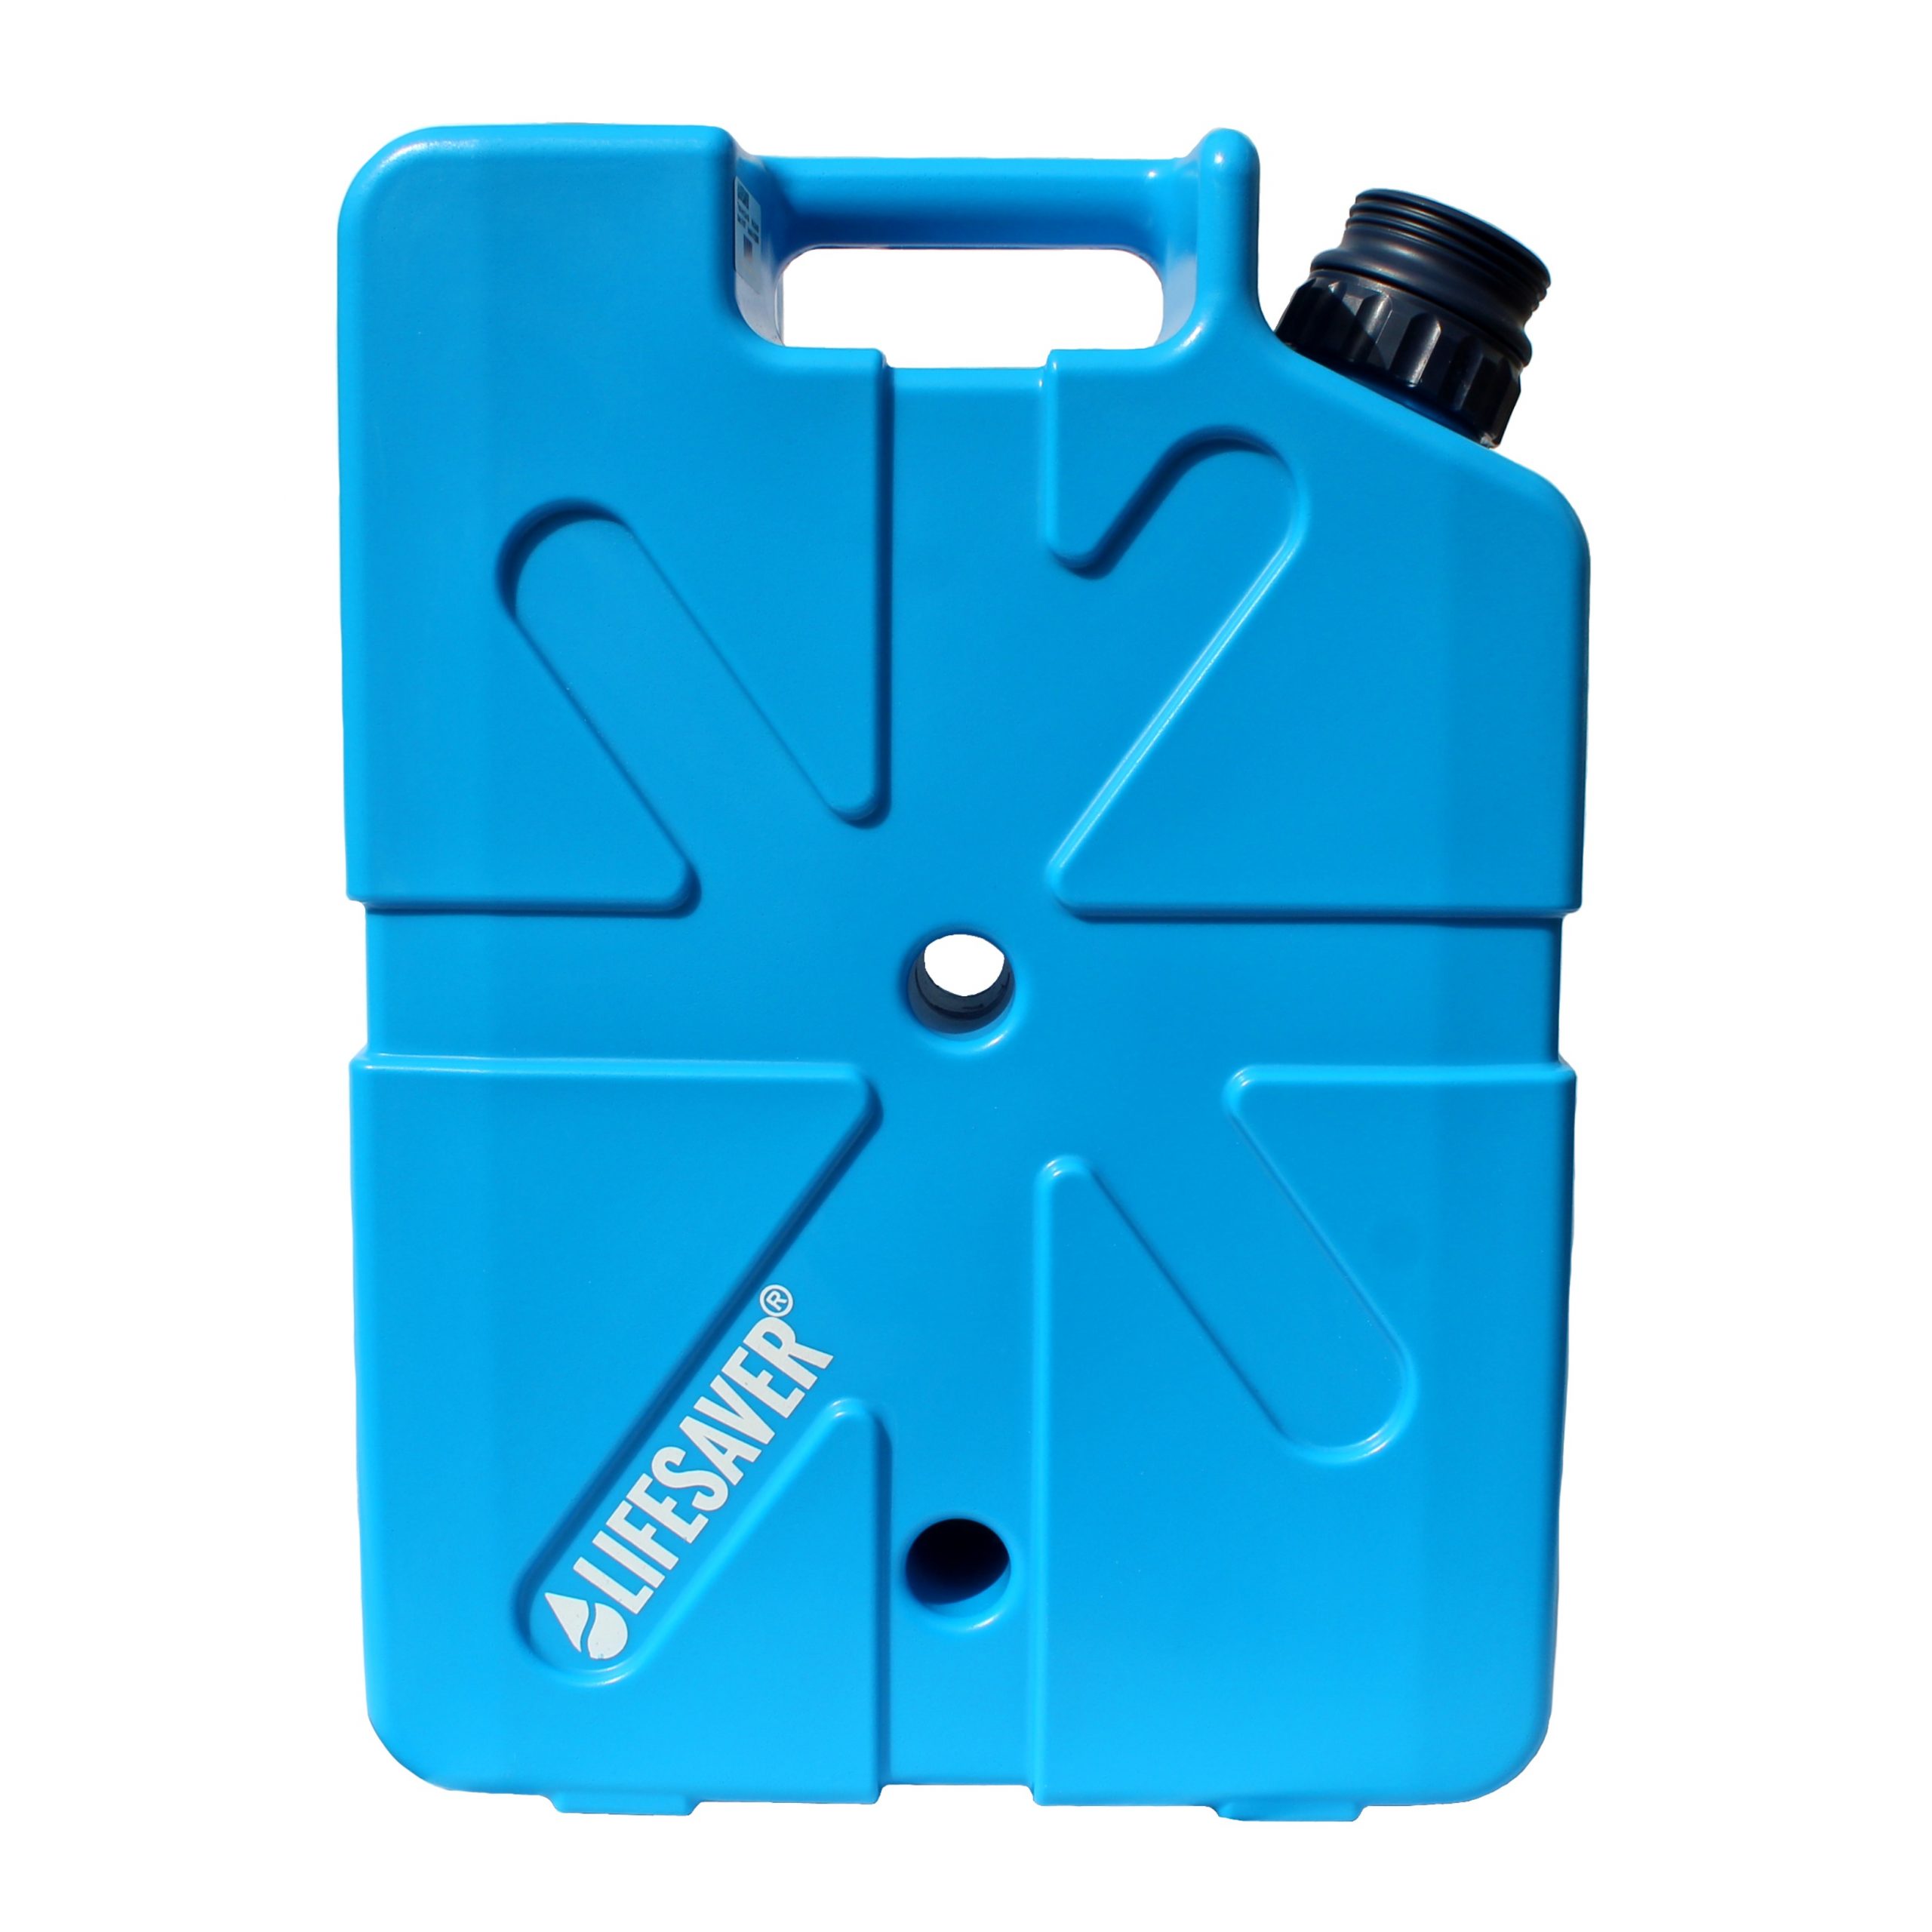 Find out more about Private: LifeSaver Jerrycan 10000UF